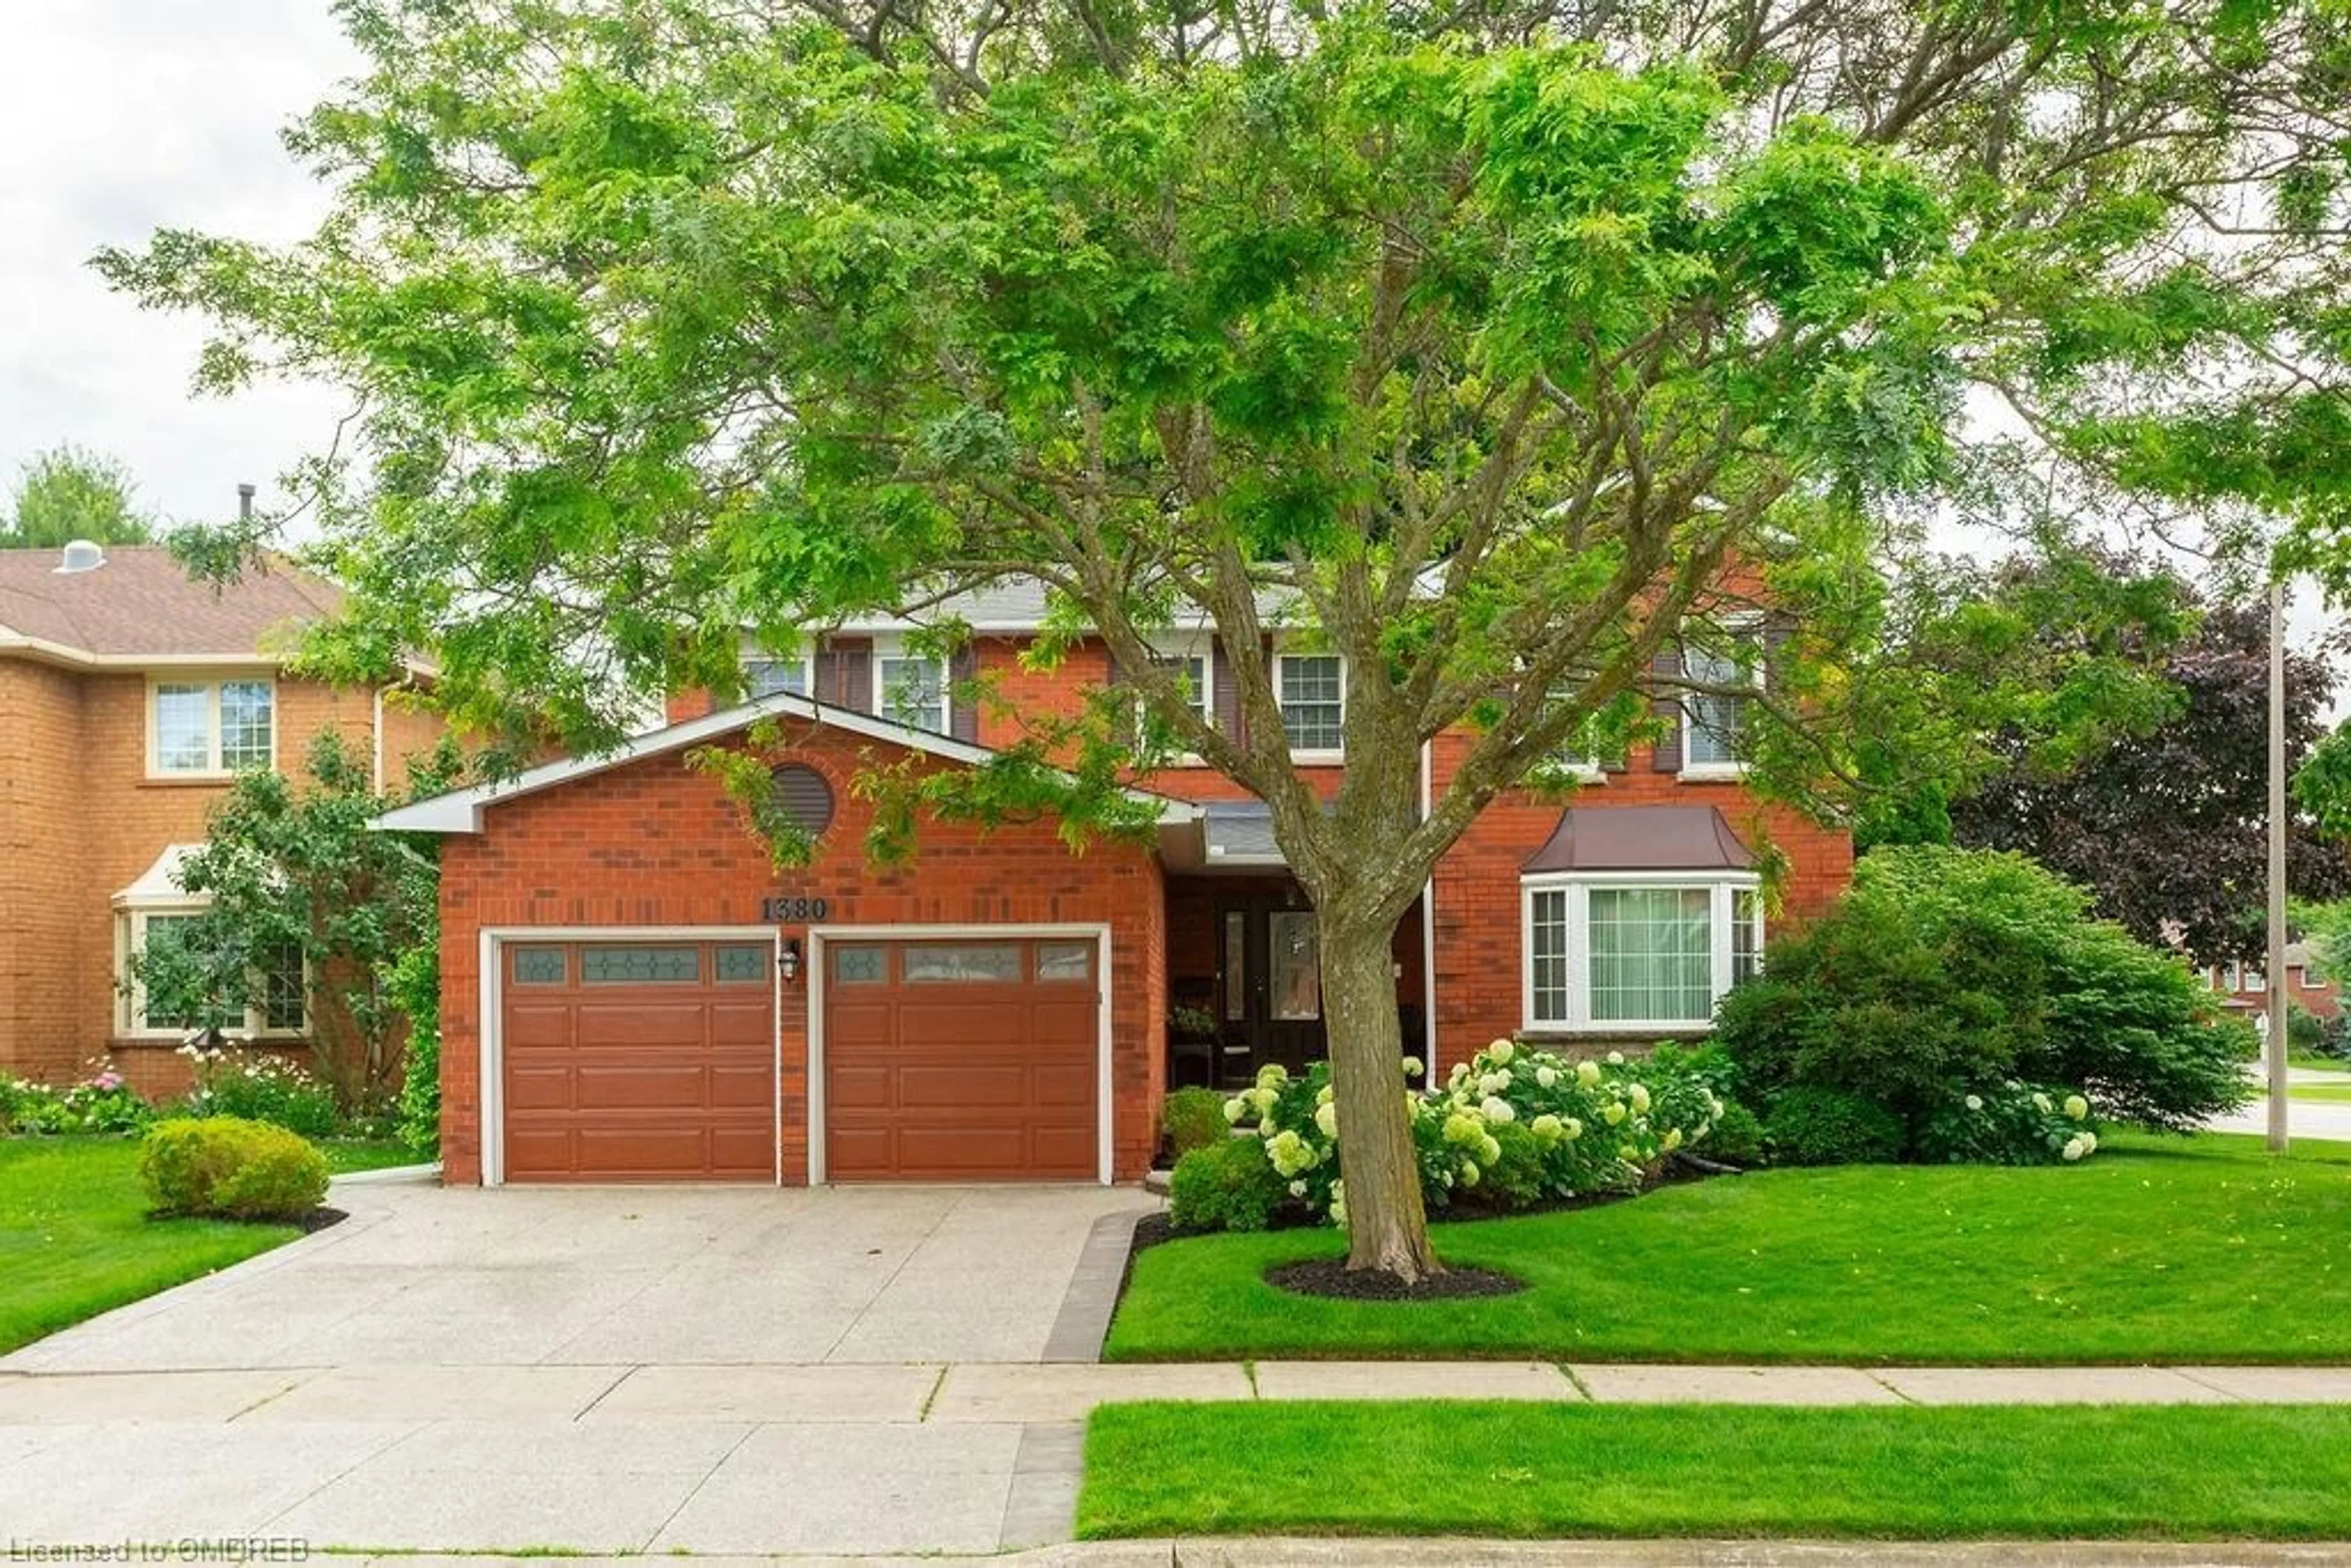 Home with brick exterior material for 1380 Old English Lane, Oakville Ontario L6M 2P8